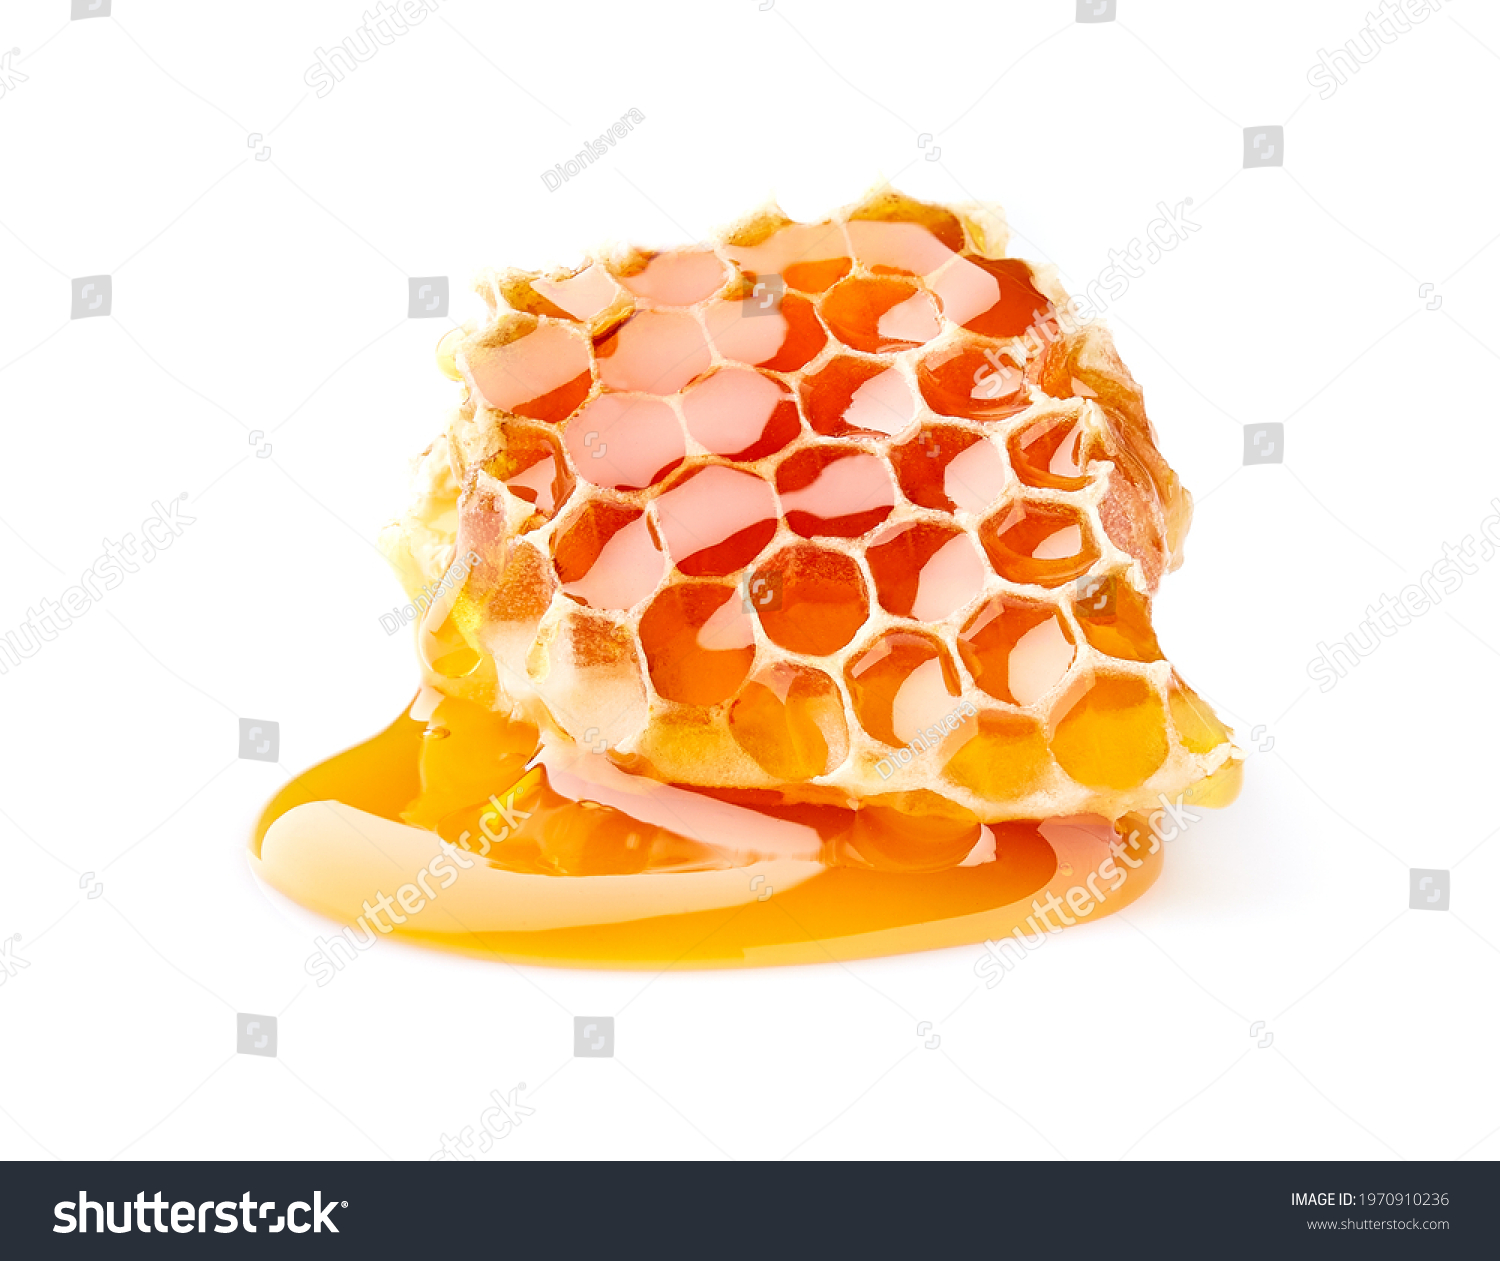 Honeycomb in closeup on white background #1970910236